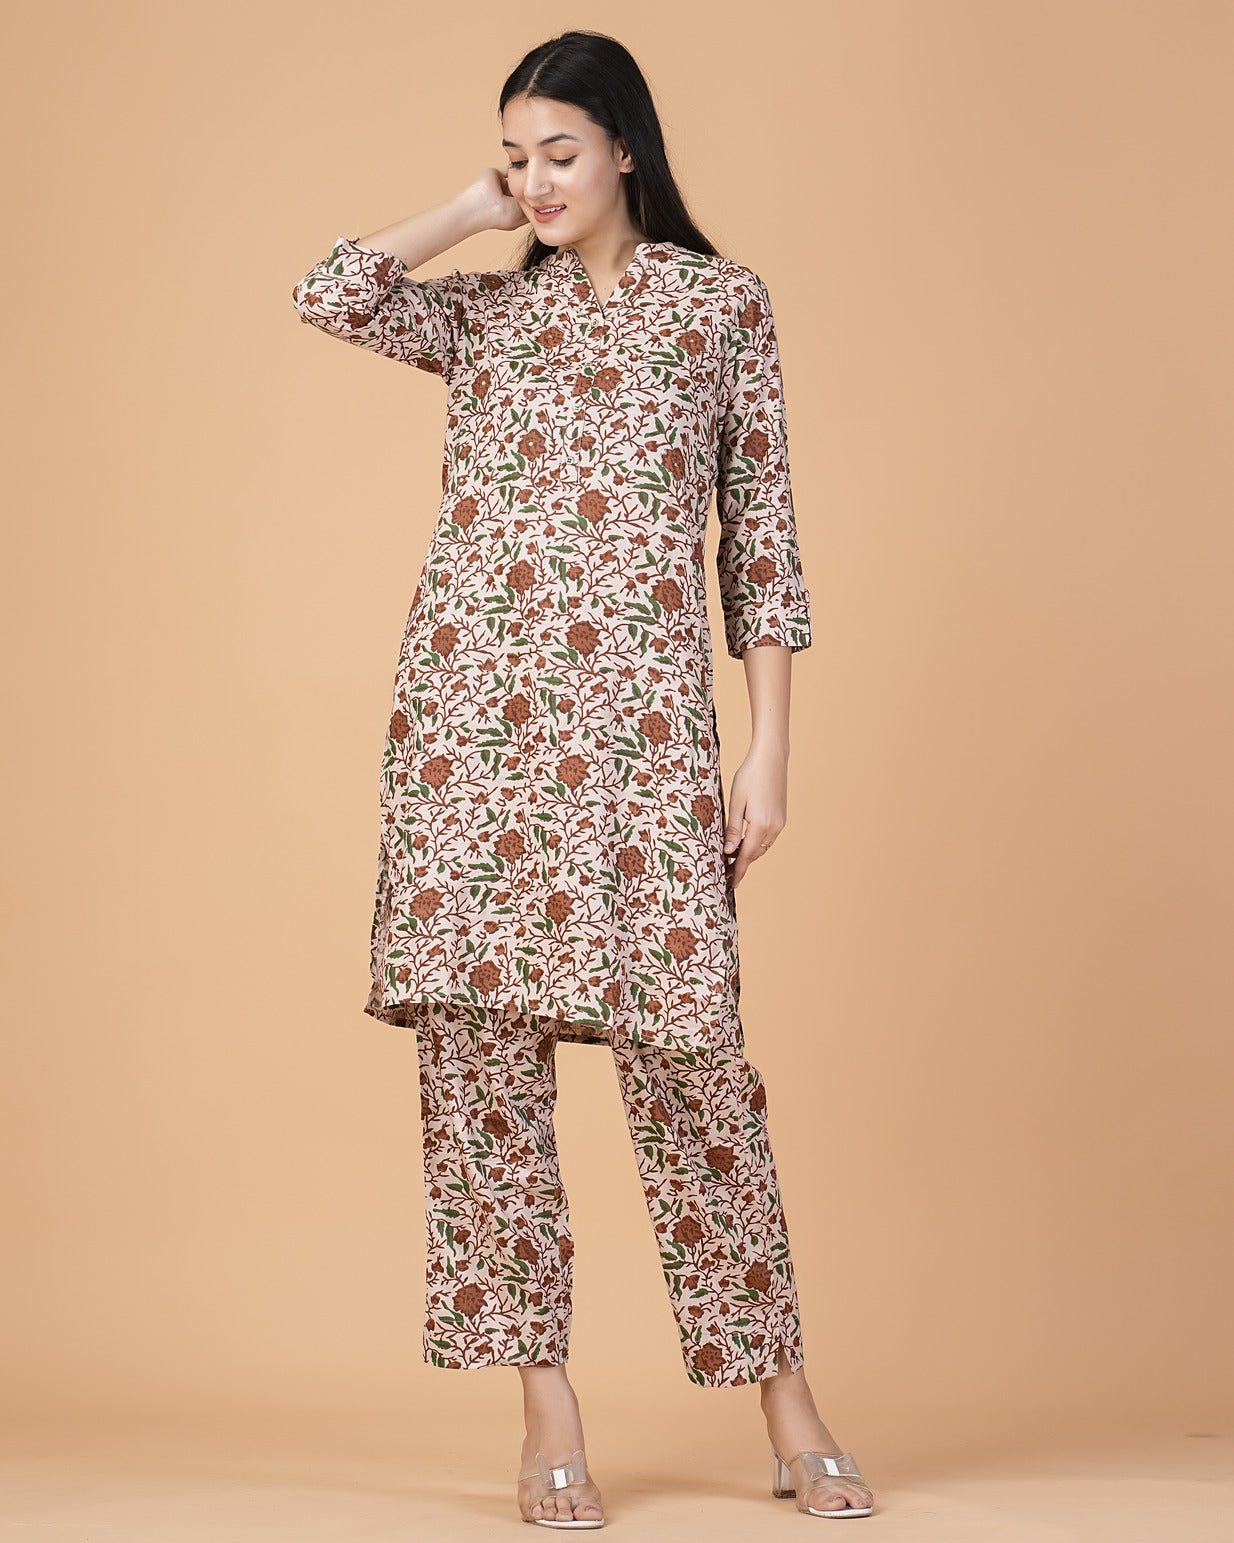 Brown and Green Floral Printed with Silver Embroidery Cotton Kurti Set